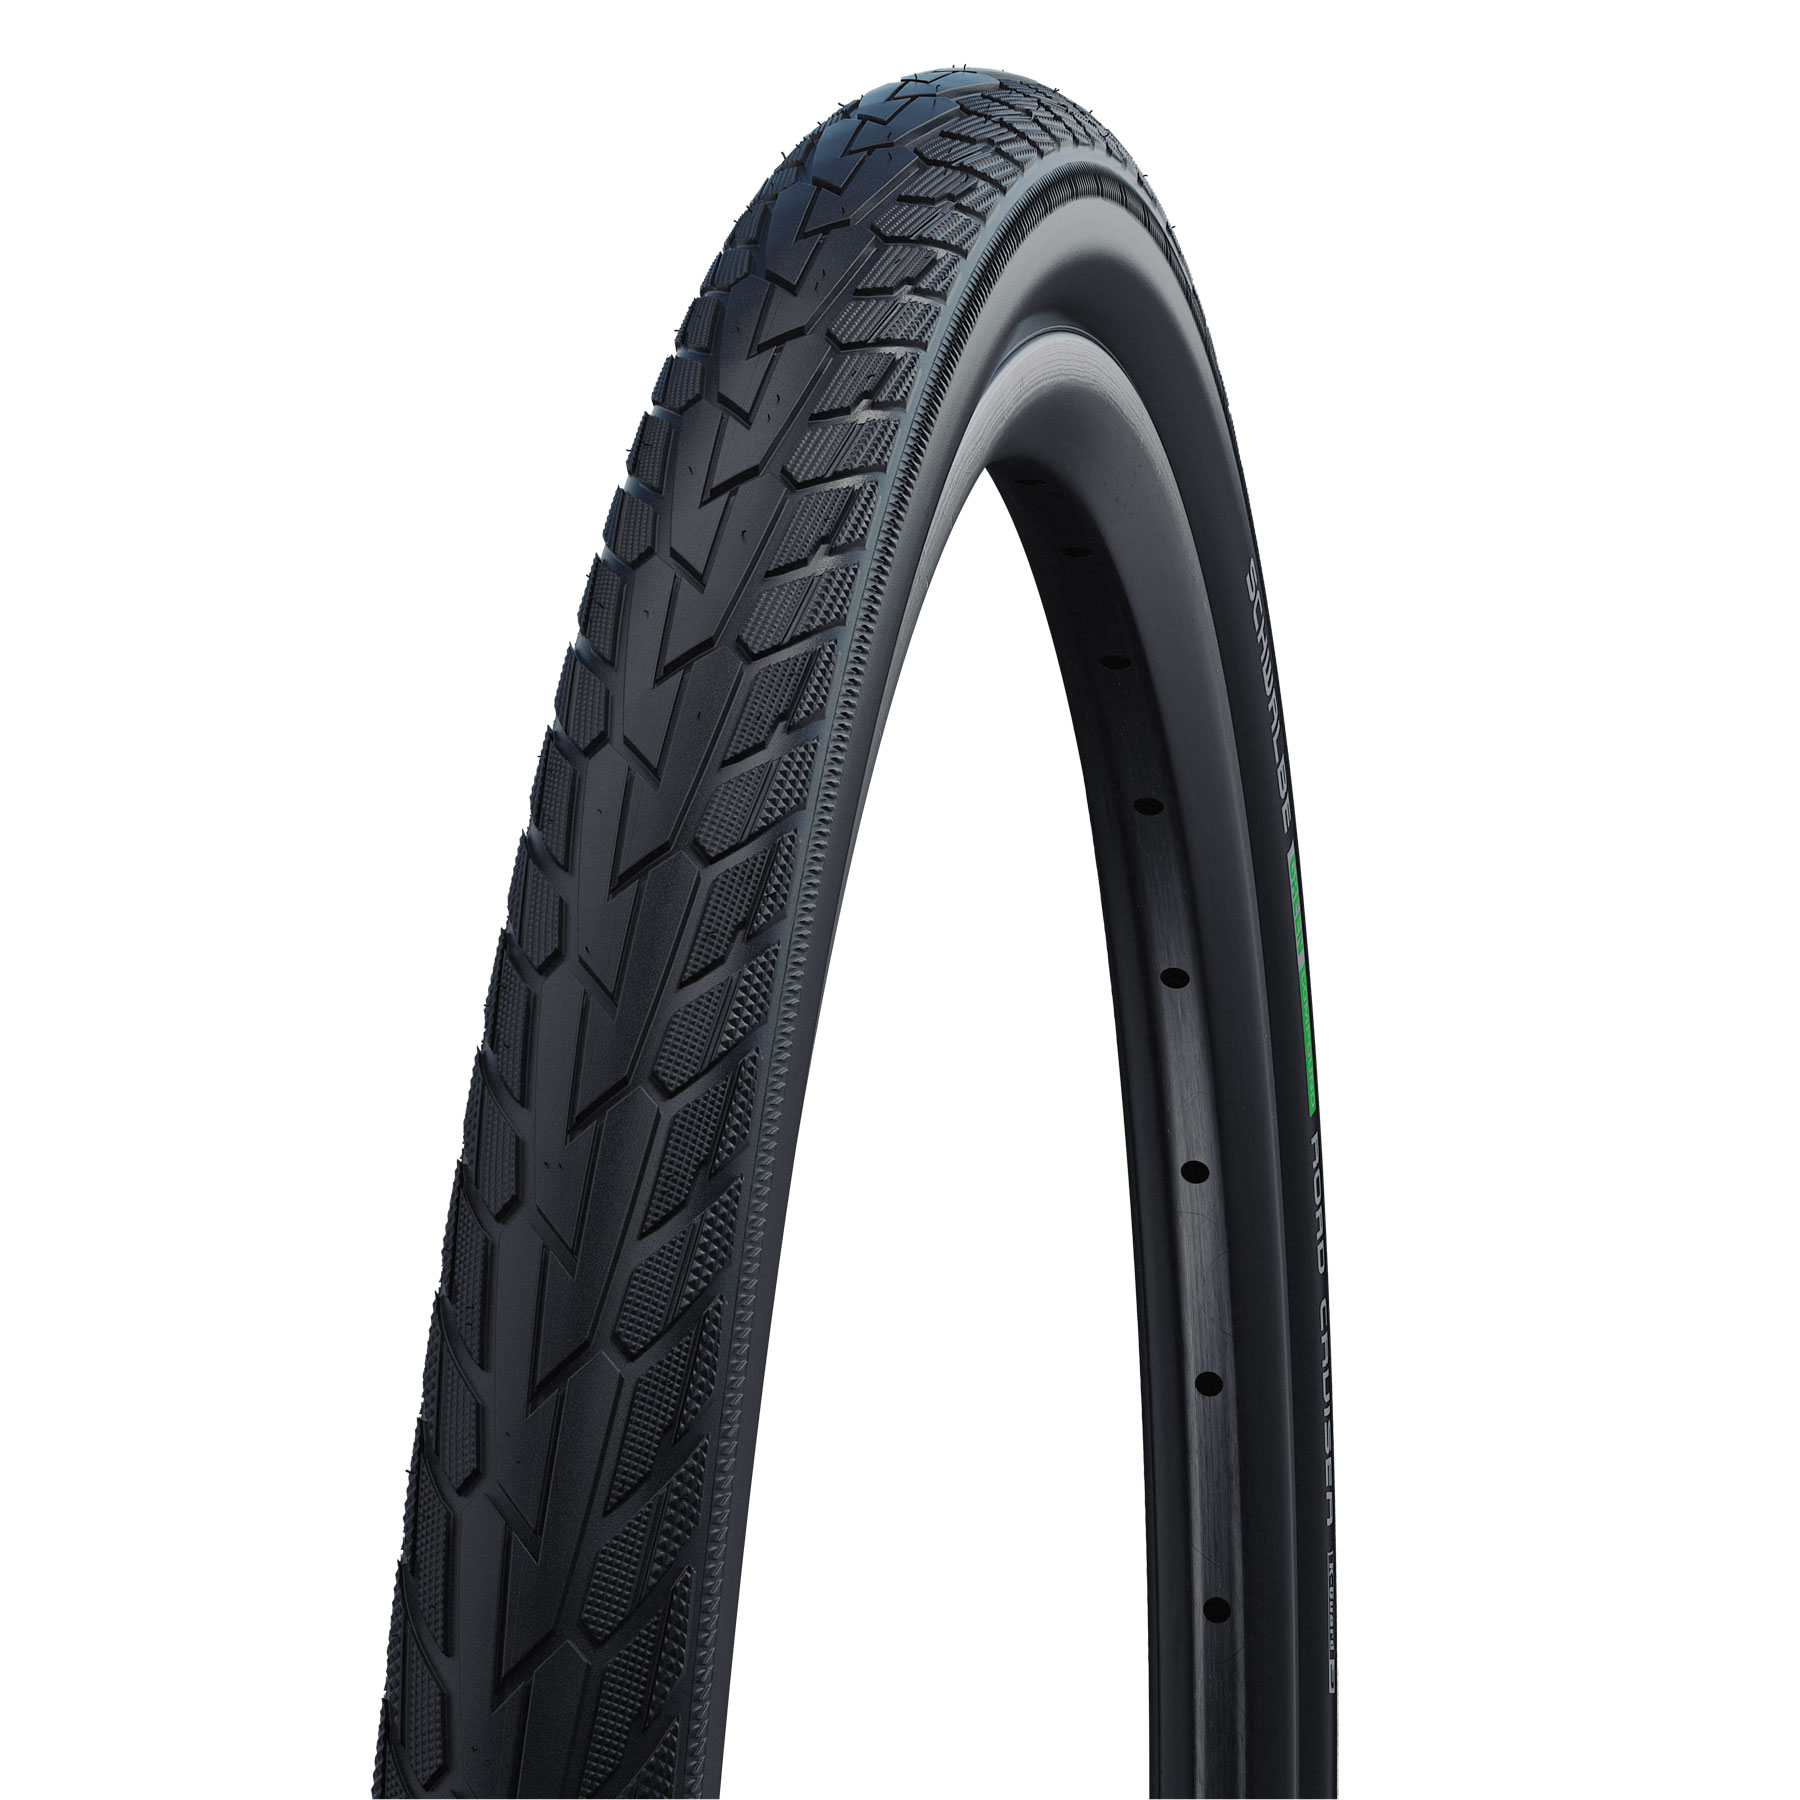 Productfoto van Schwalbe Road Cruiser Active Wired Tire - 24x1.75 Inches - Black